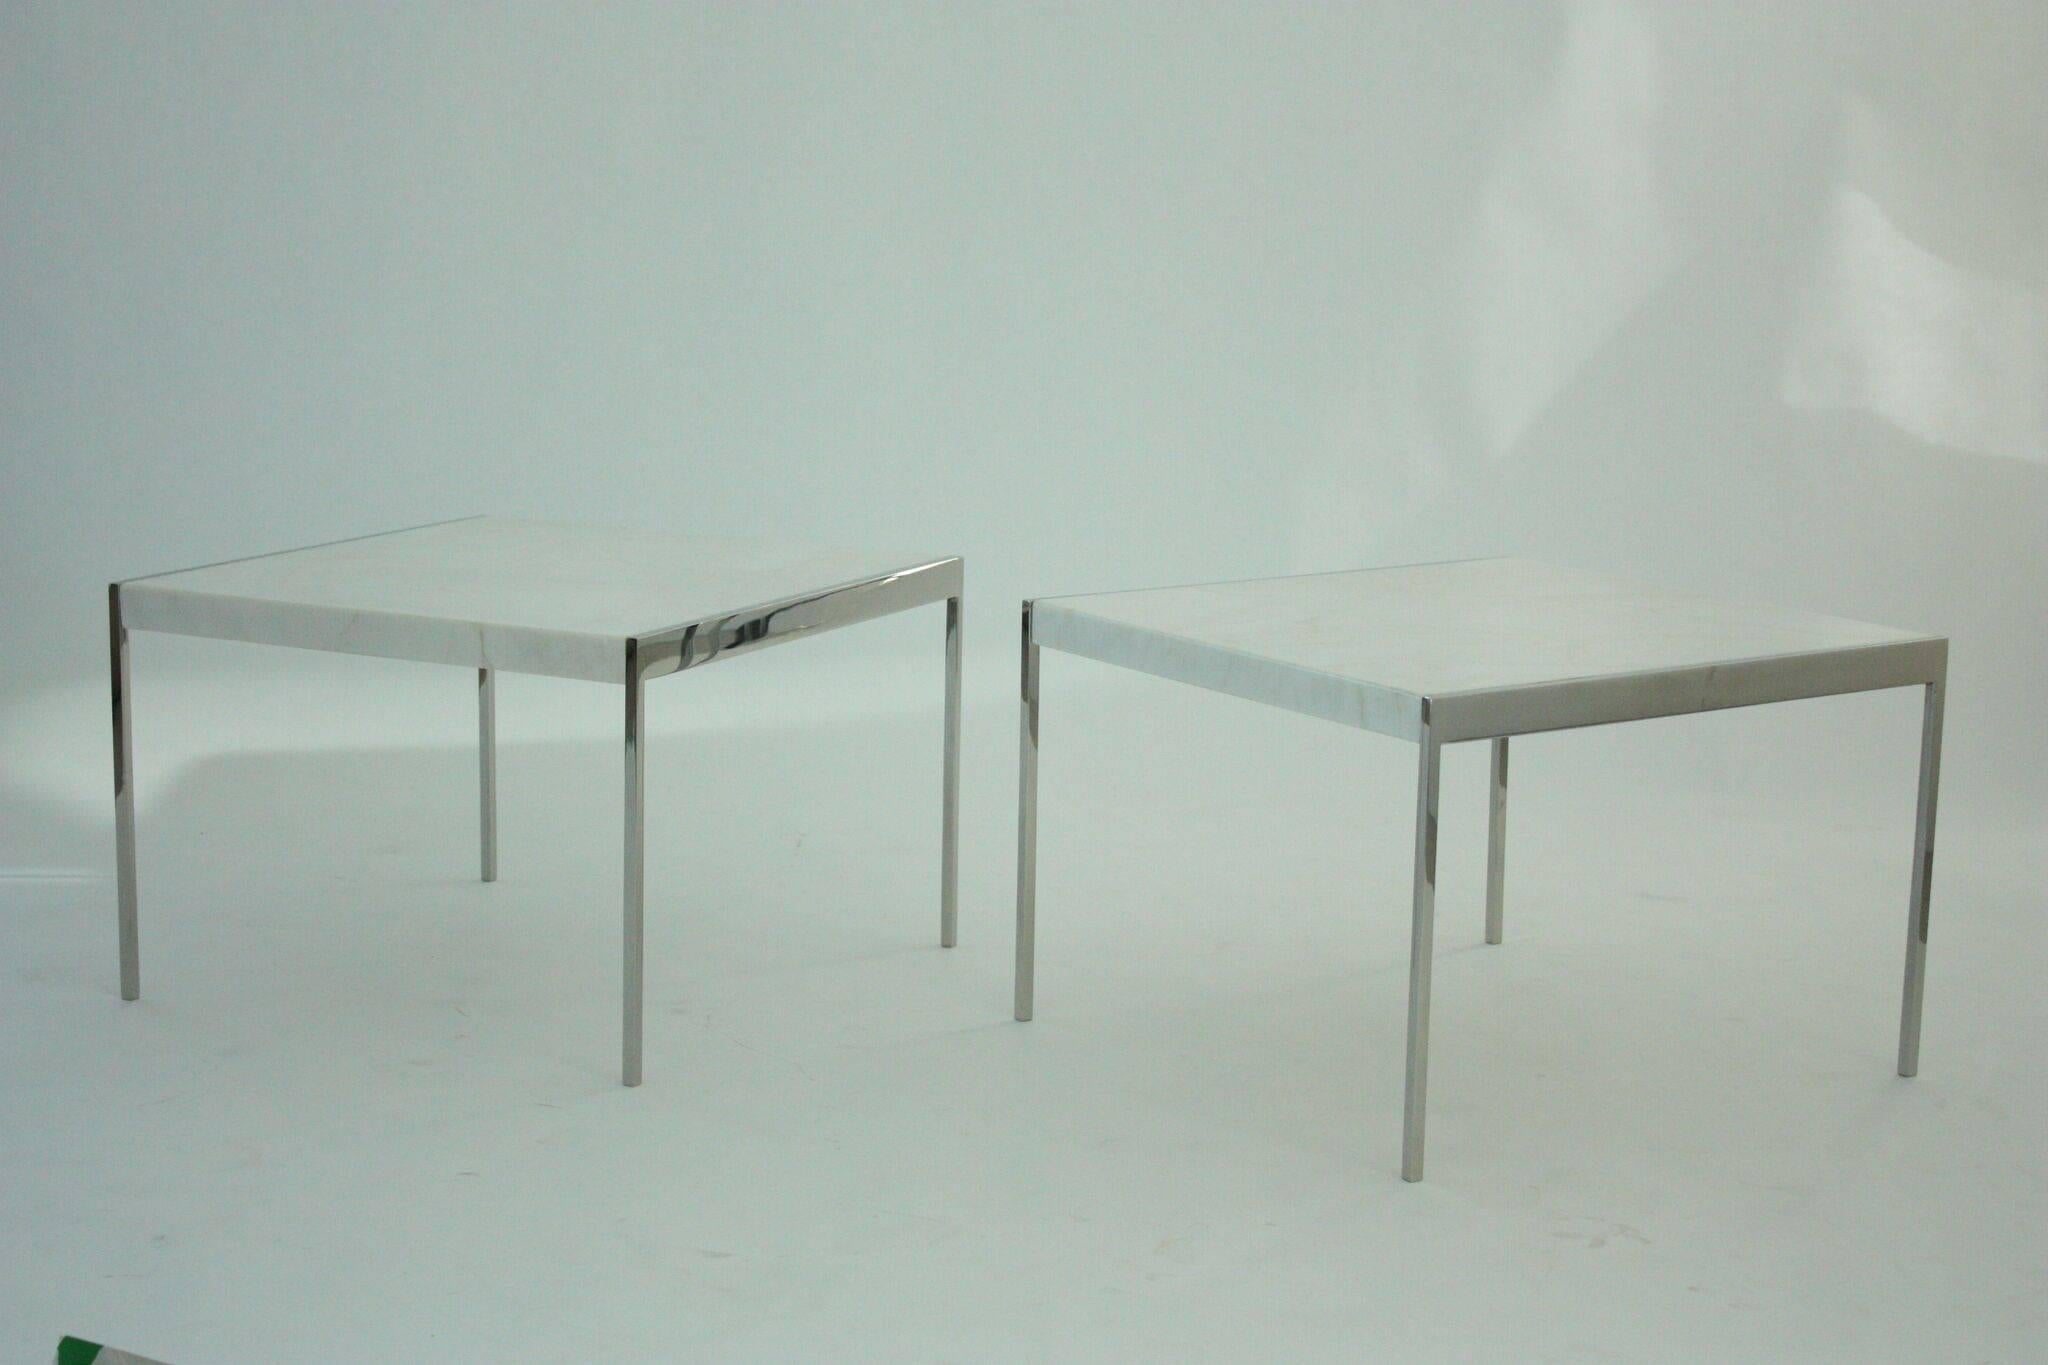 Pair of midcentury chrome steel and marble tables. In the style of Knoll, circa 1970s. Very good vintage condition consistent with age.
 

Measures: 22